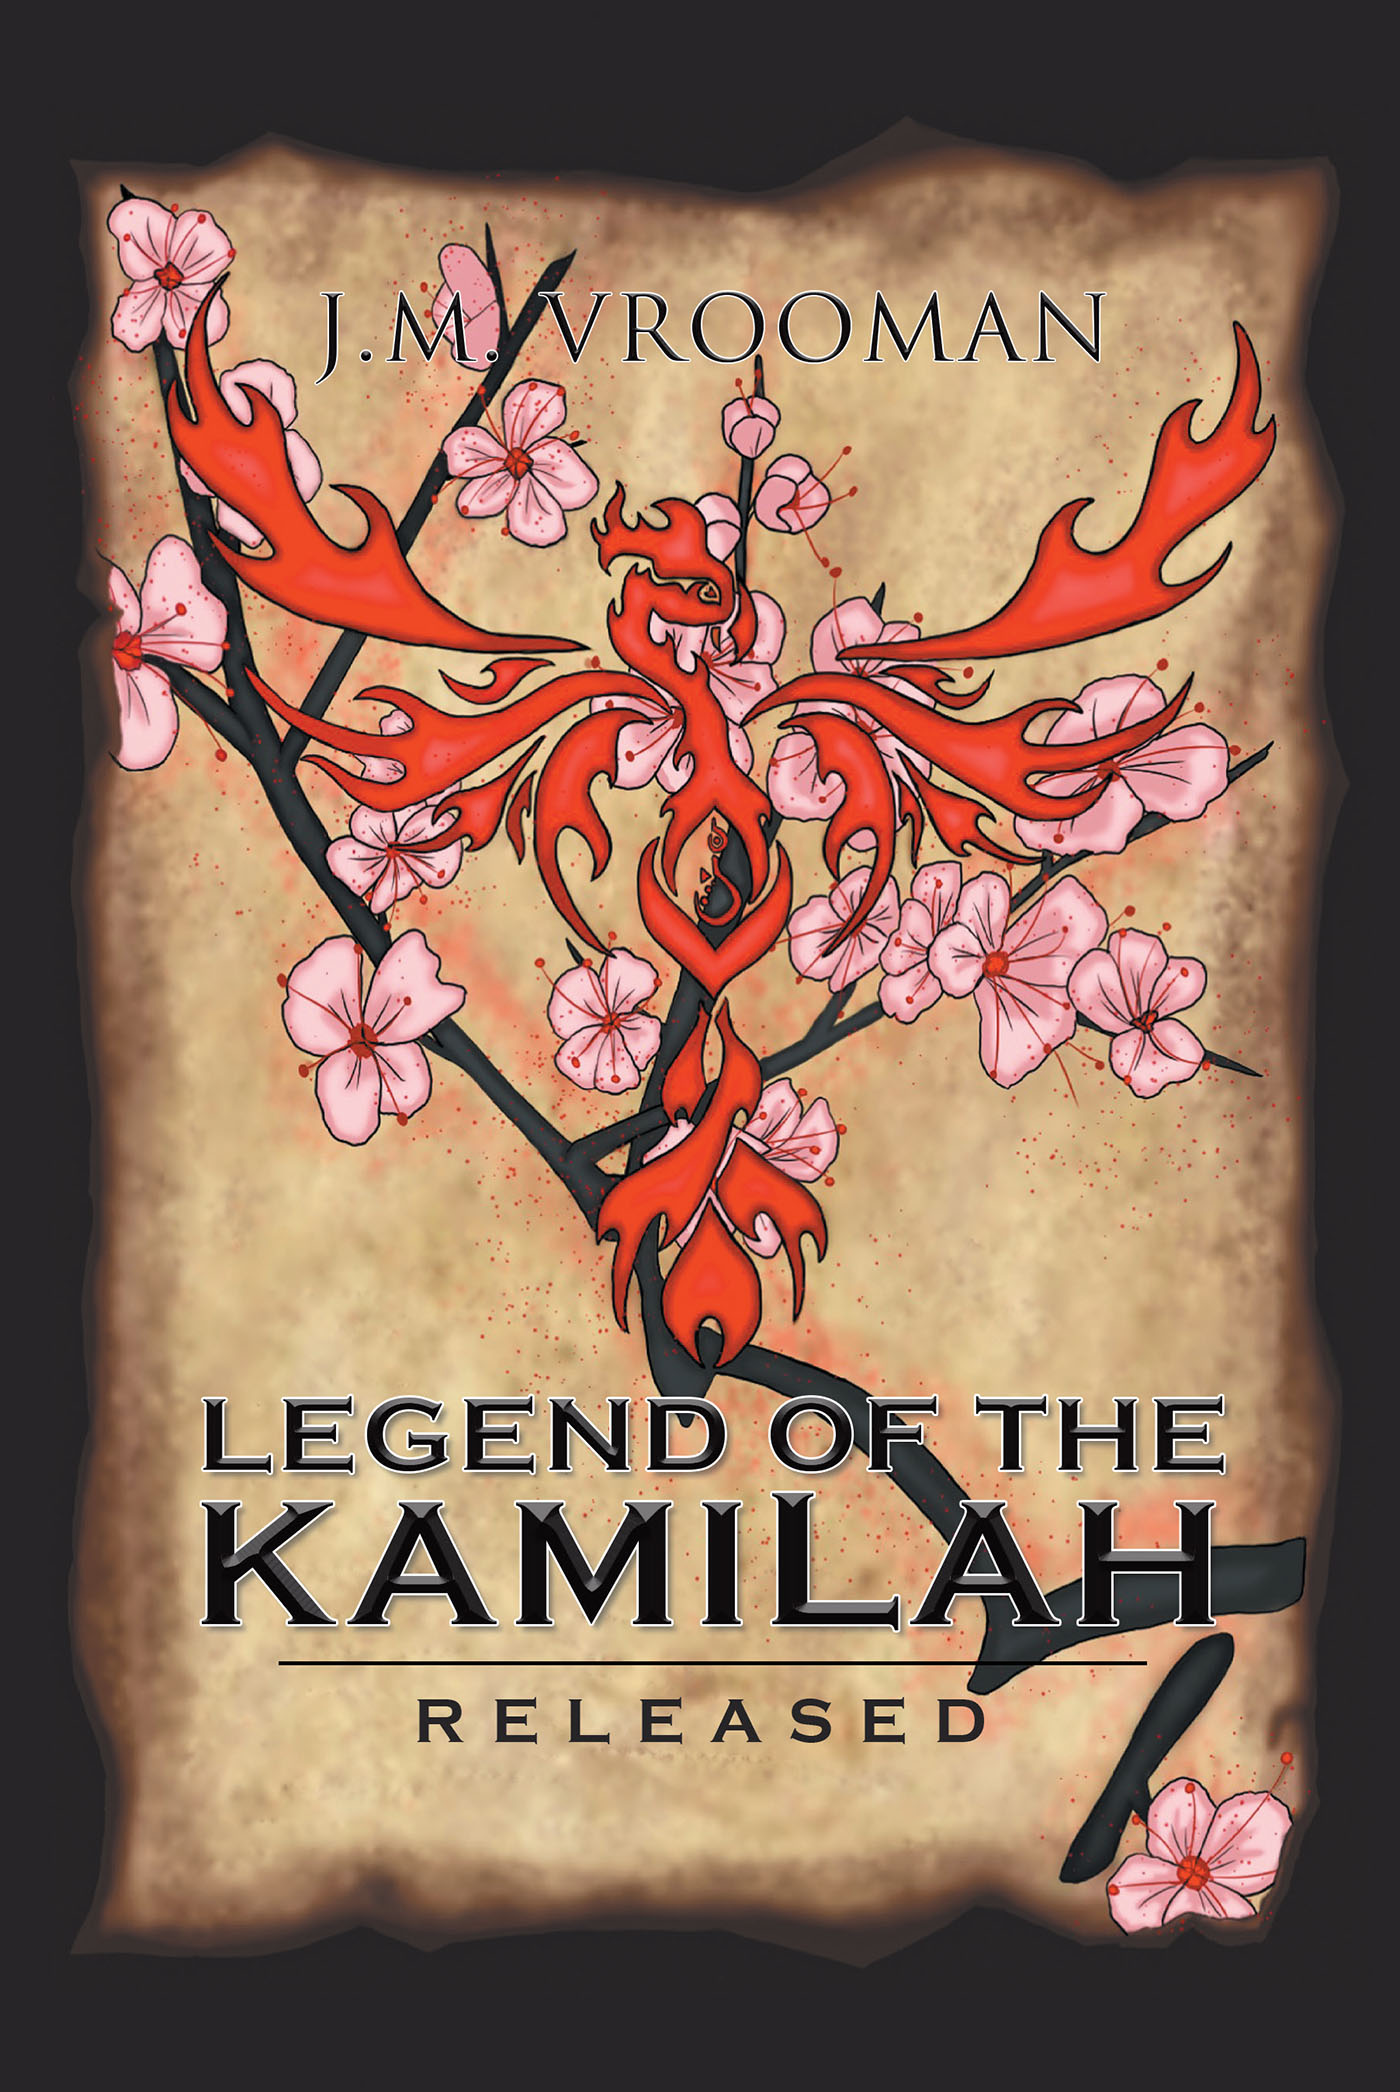 Legend of the KamiLah Cover Image